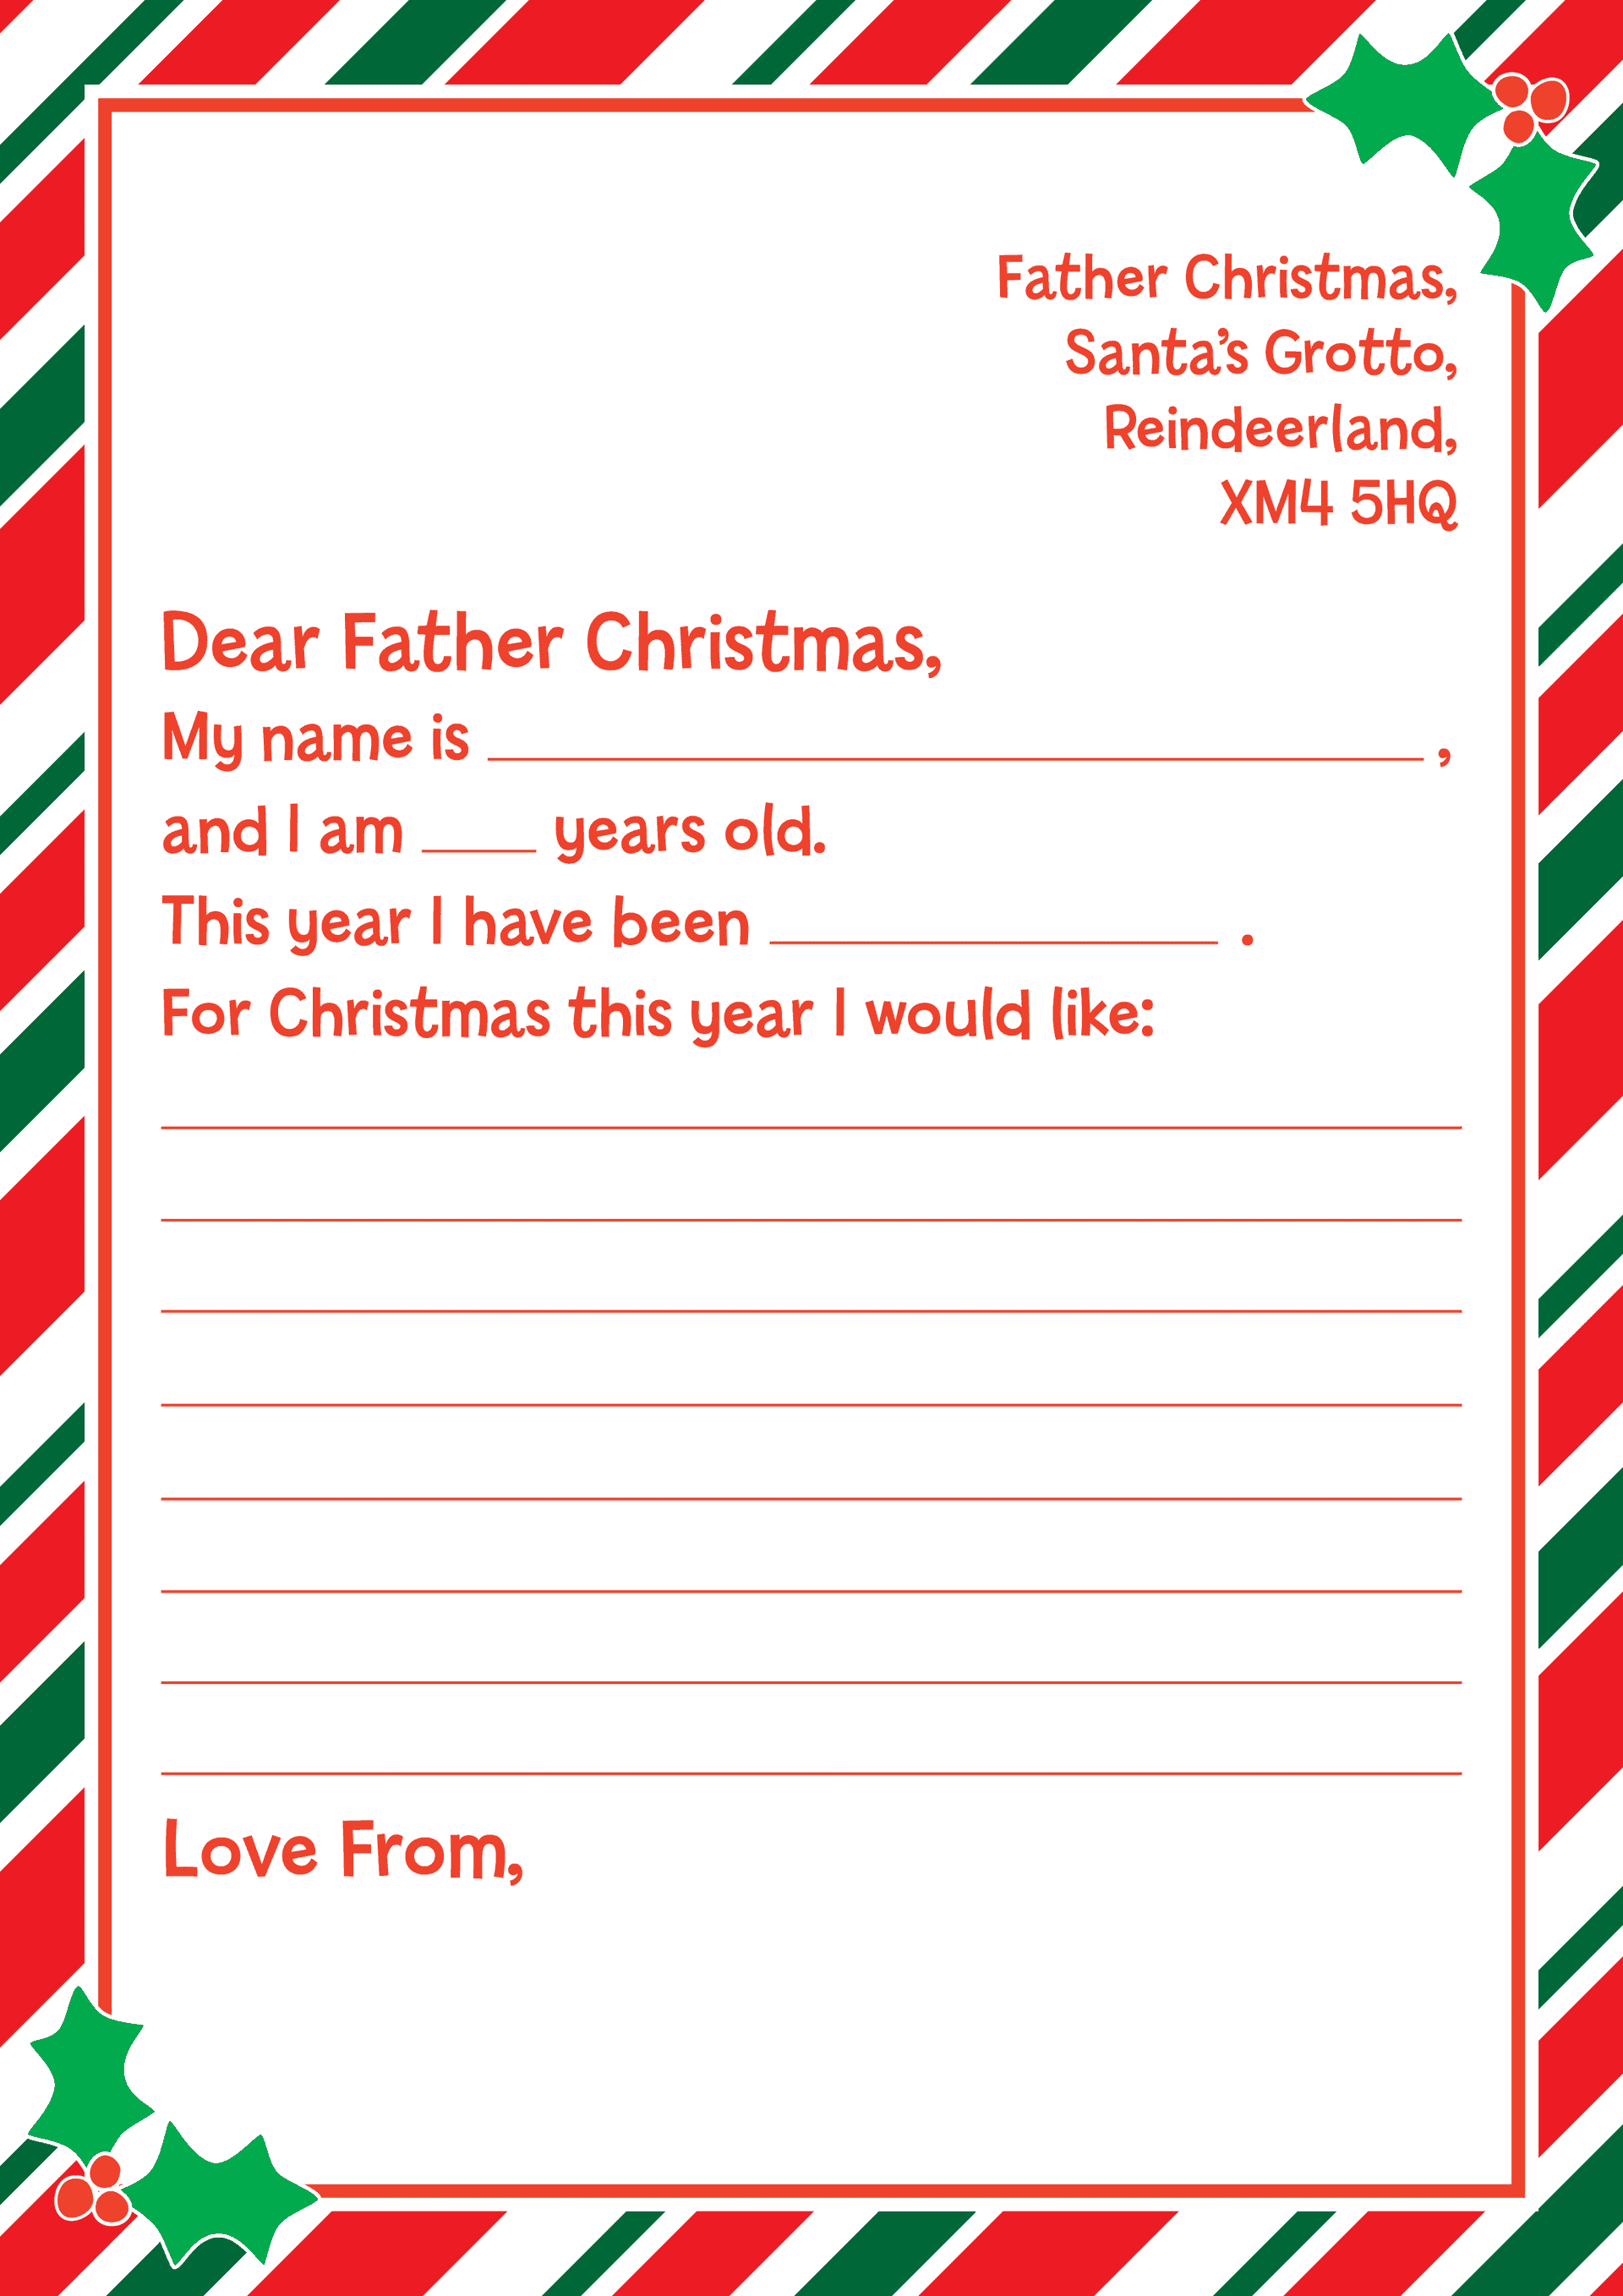 father-christmas-letter-template-cheapest-shopping-save-65-jlcatj